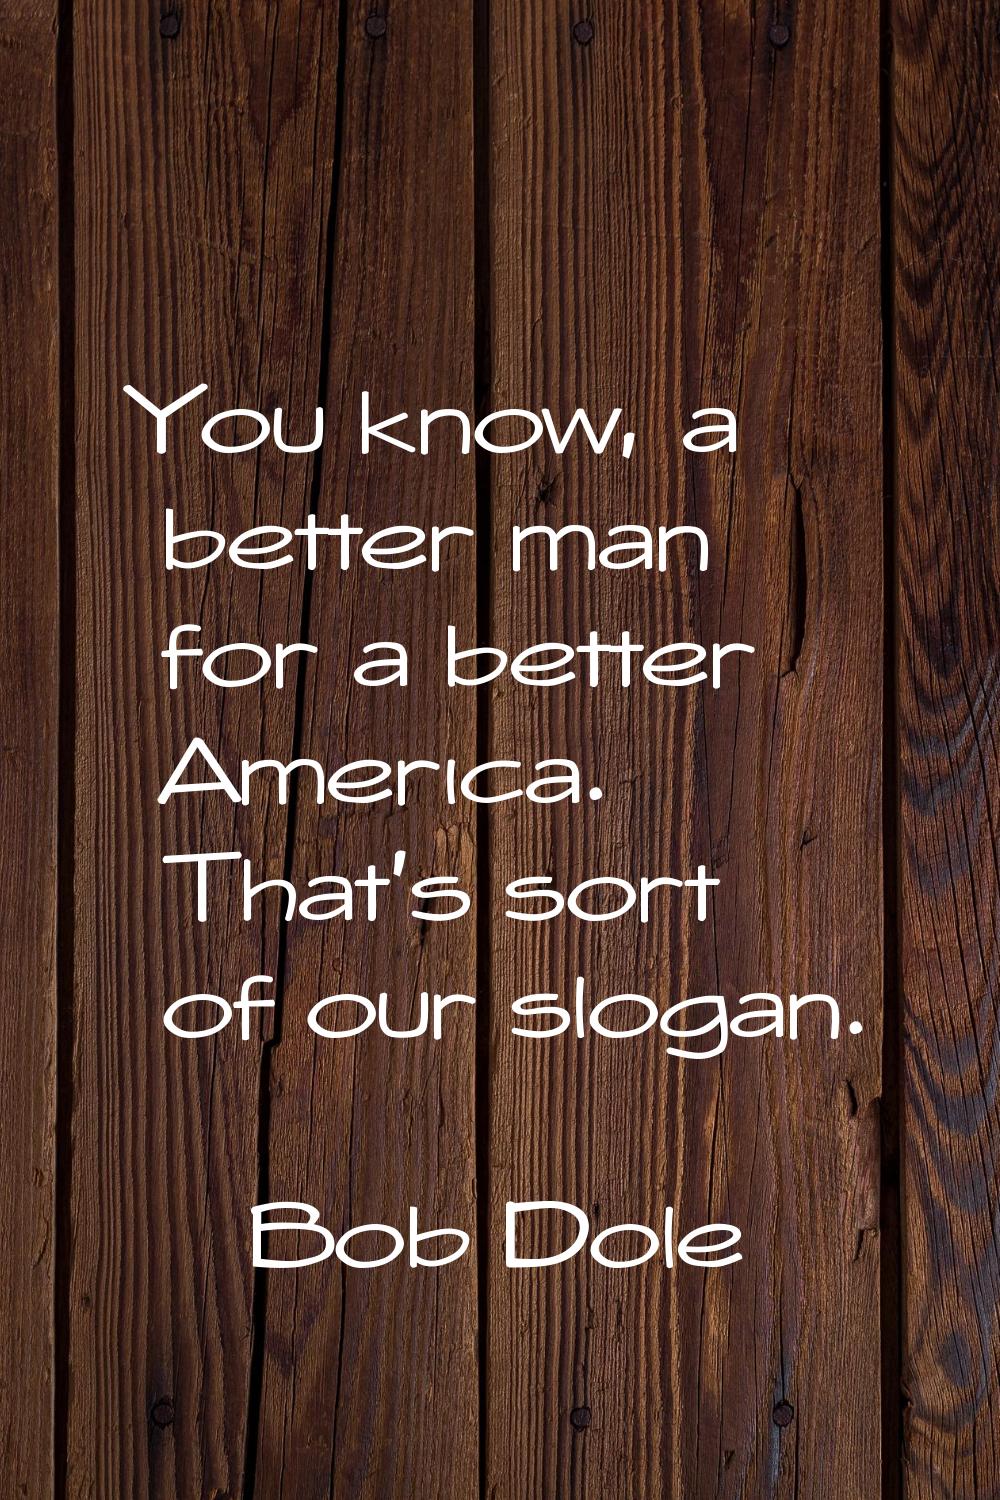 You know, a better man for a better America. That's sort of our slogan.